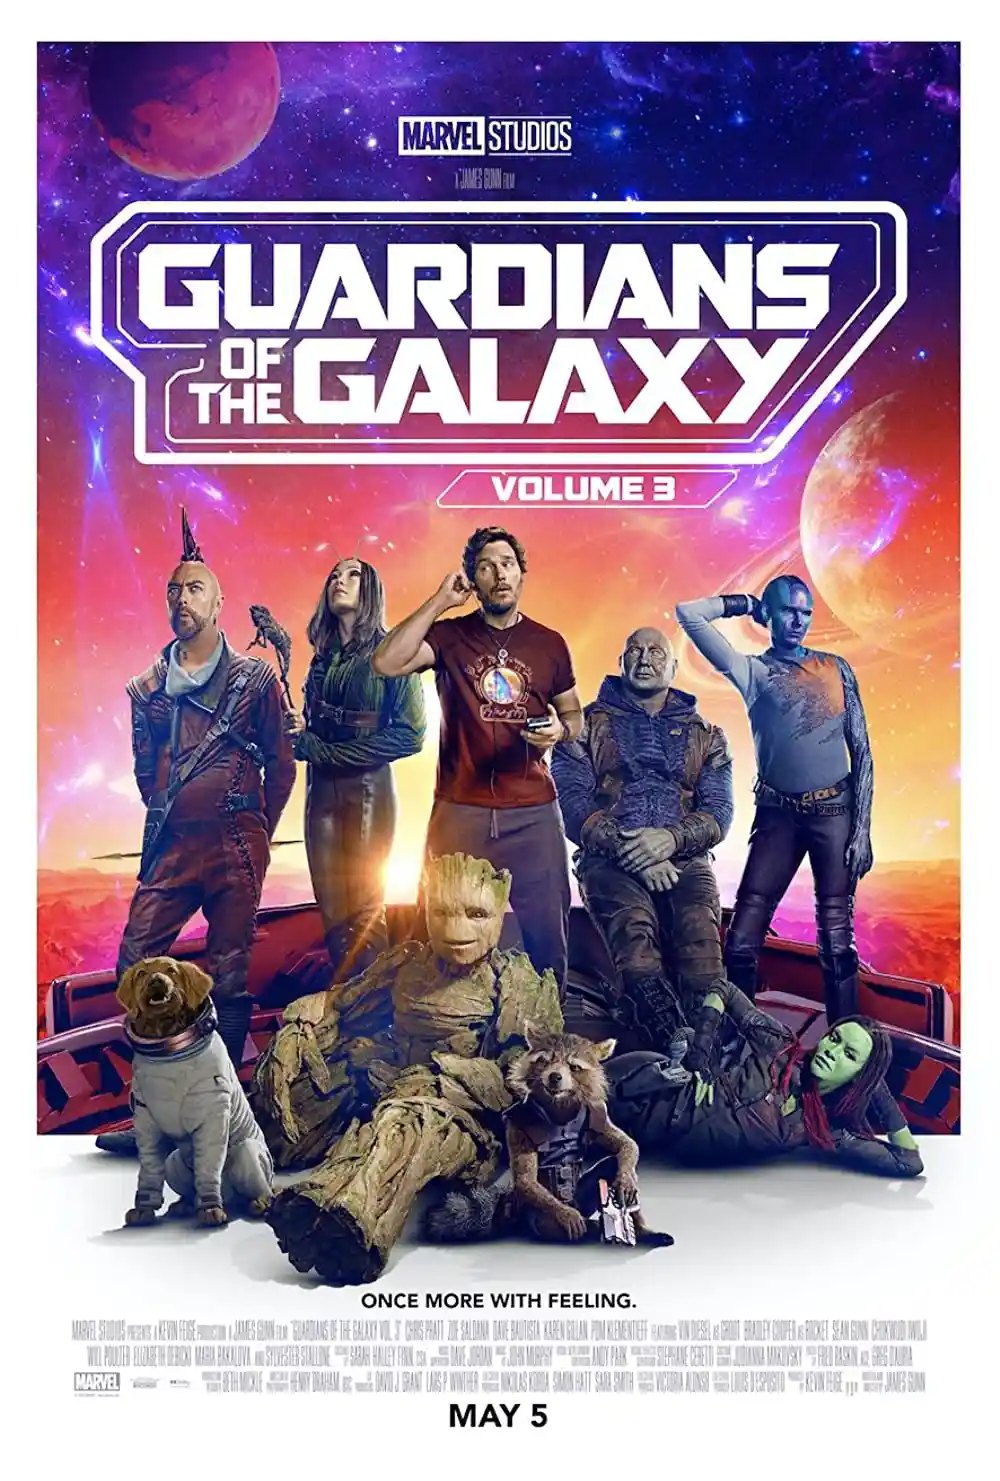 Read more about the article Guardians of the Galaxy Vol. 3 Review – What the Critics Are Saying?